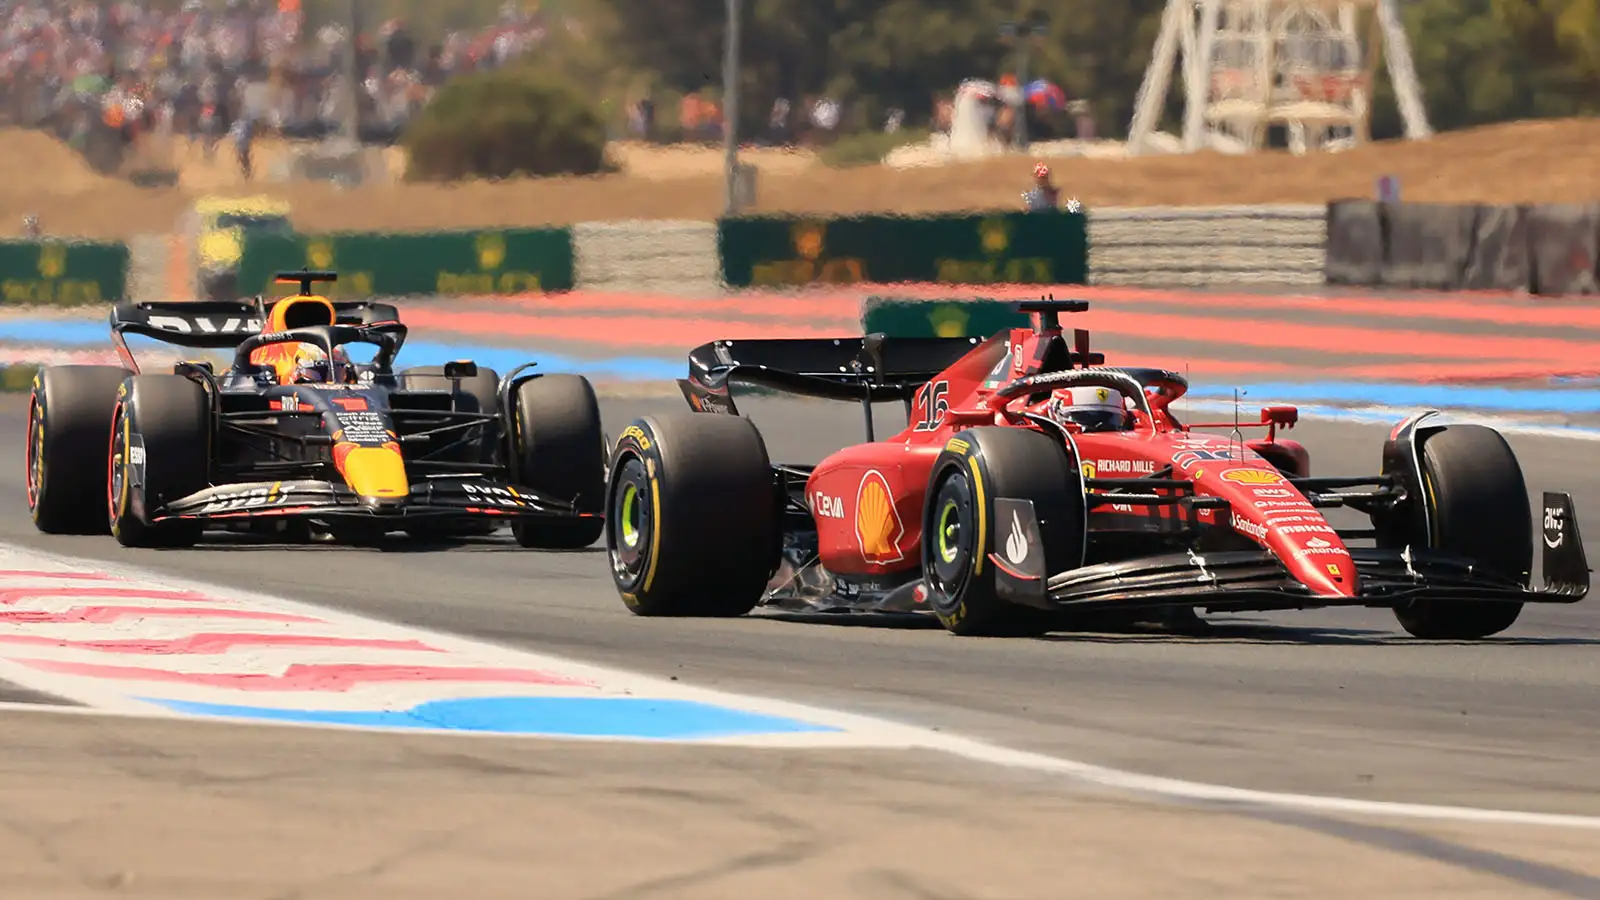 Ferrari driver Charles Leclerc leads Max Verstappen at the French Grand Prix. Le Castellet July 2022